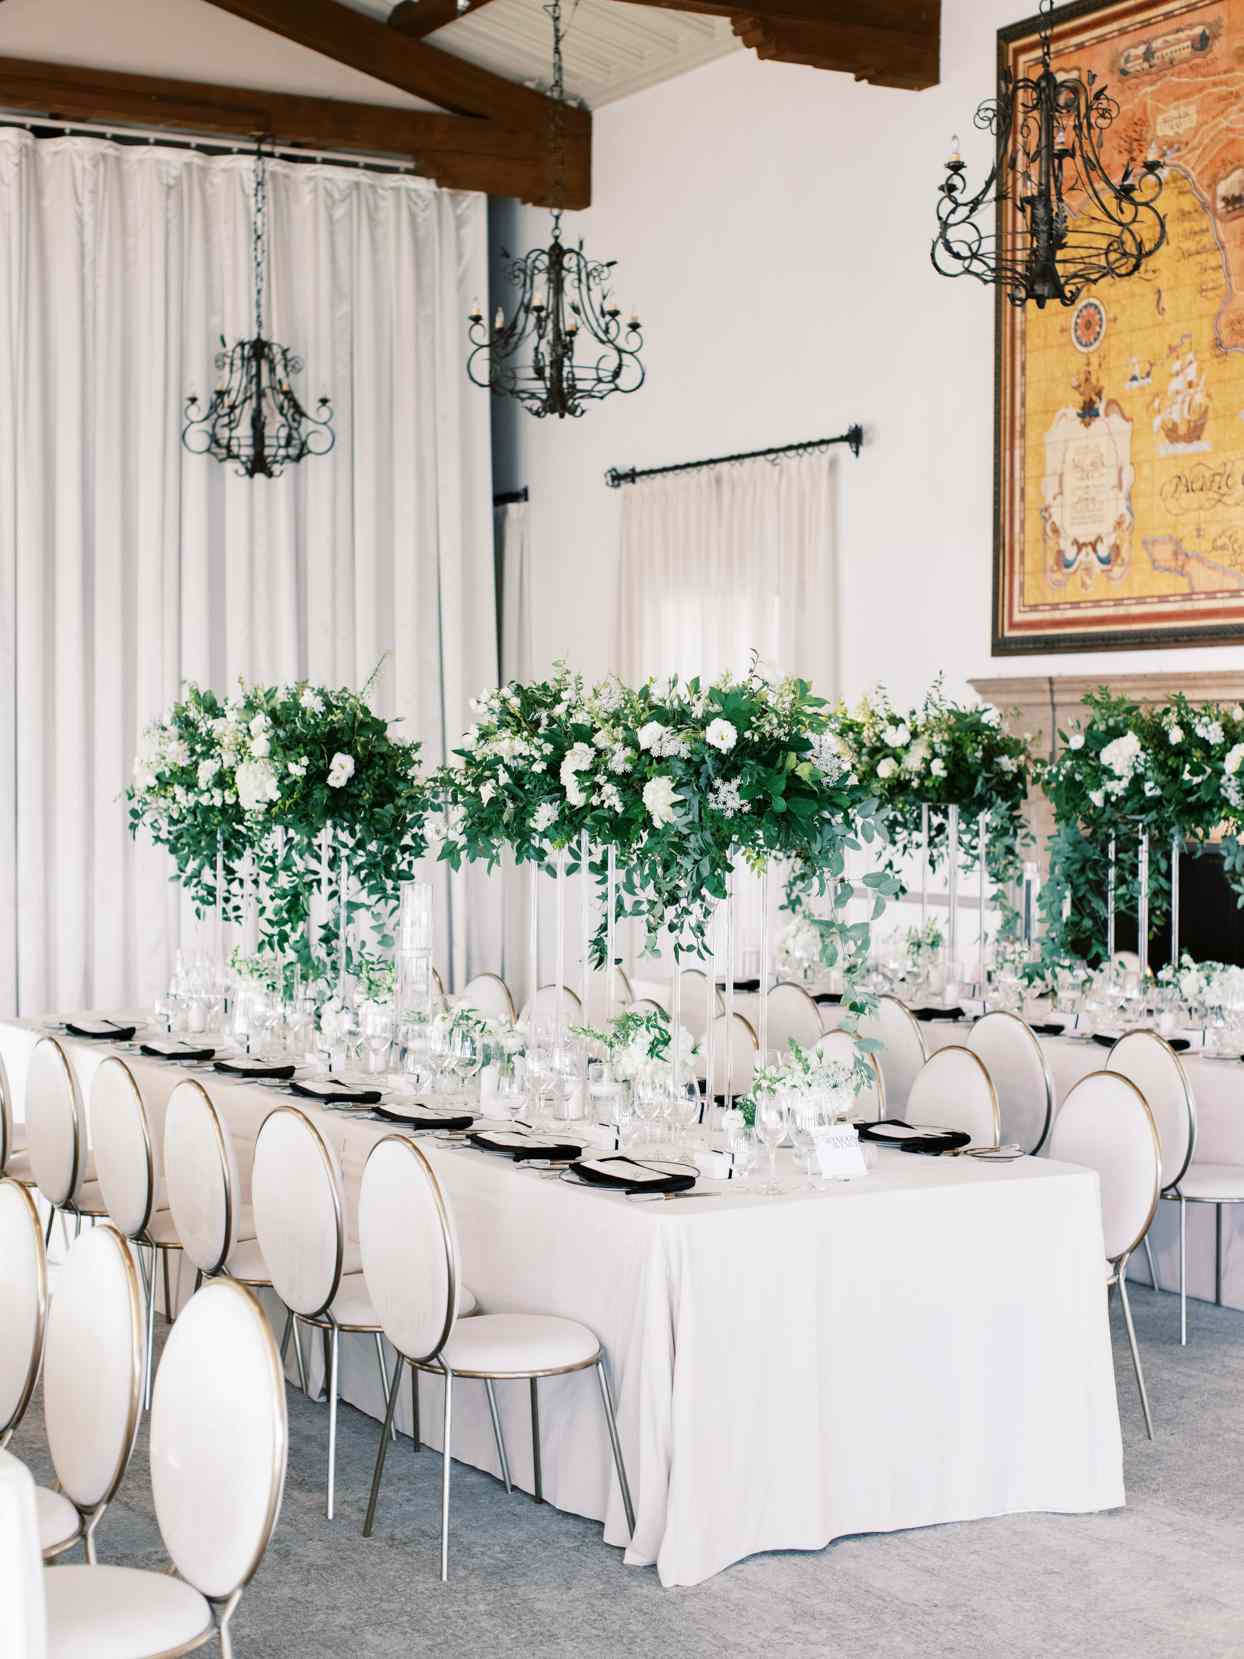 dinner reception seating with long tables with white chairs and tablecloths